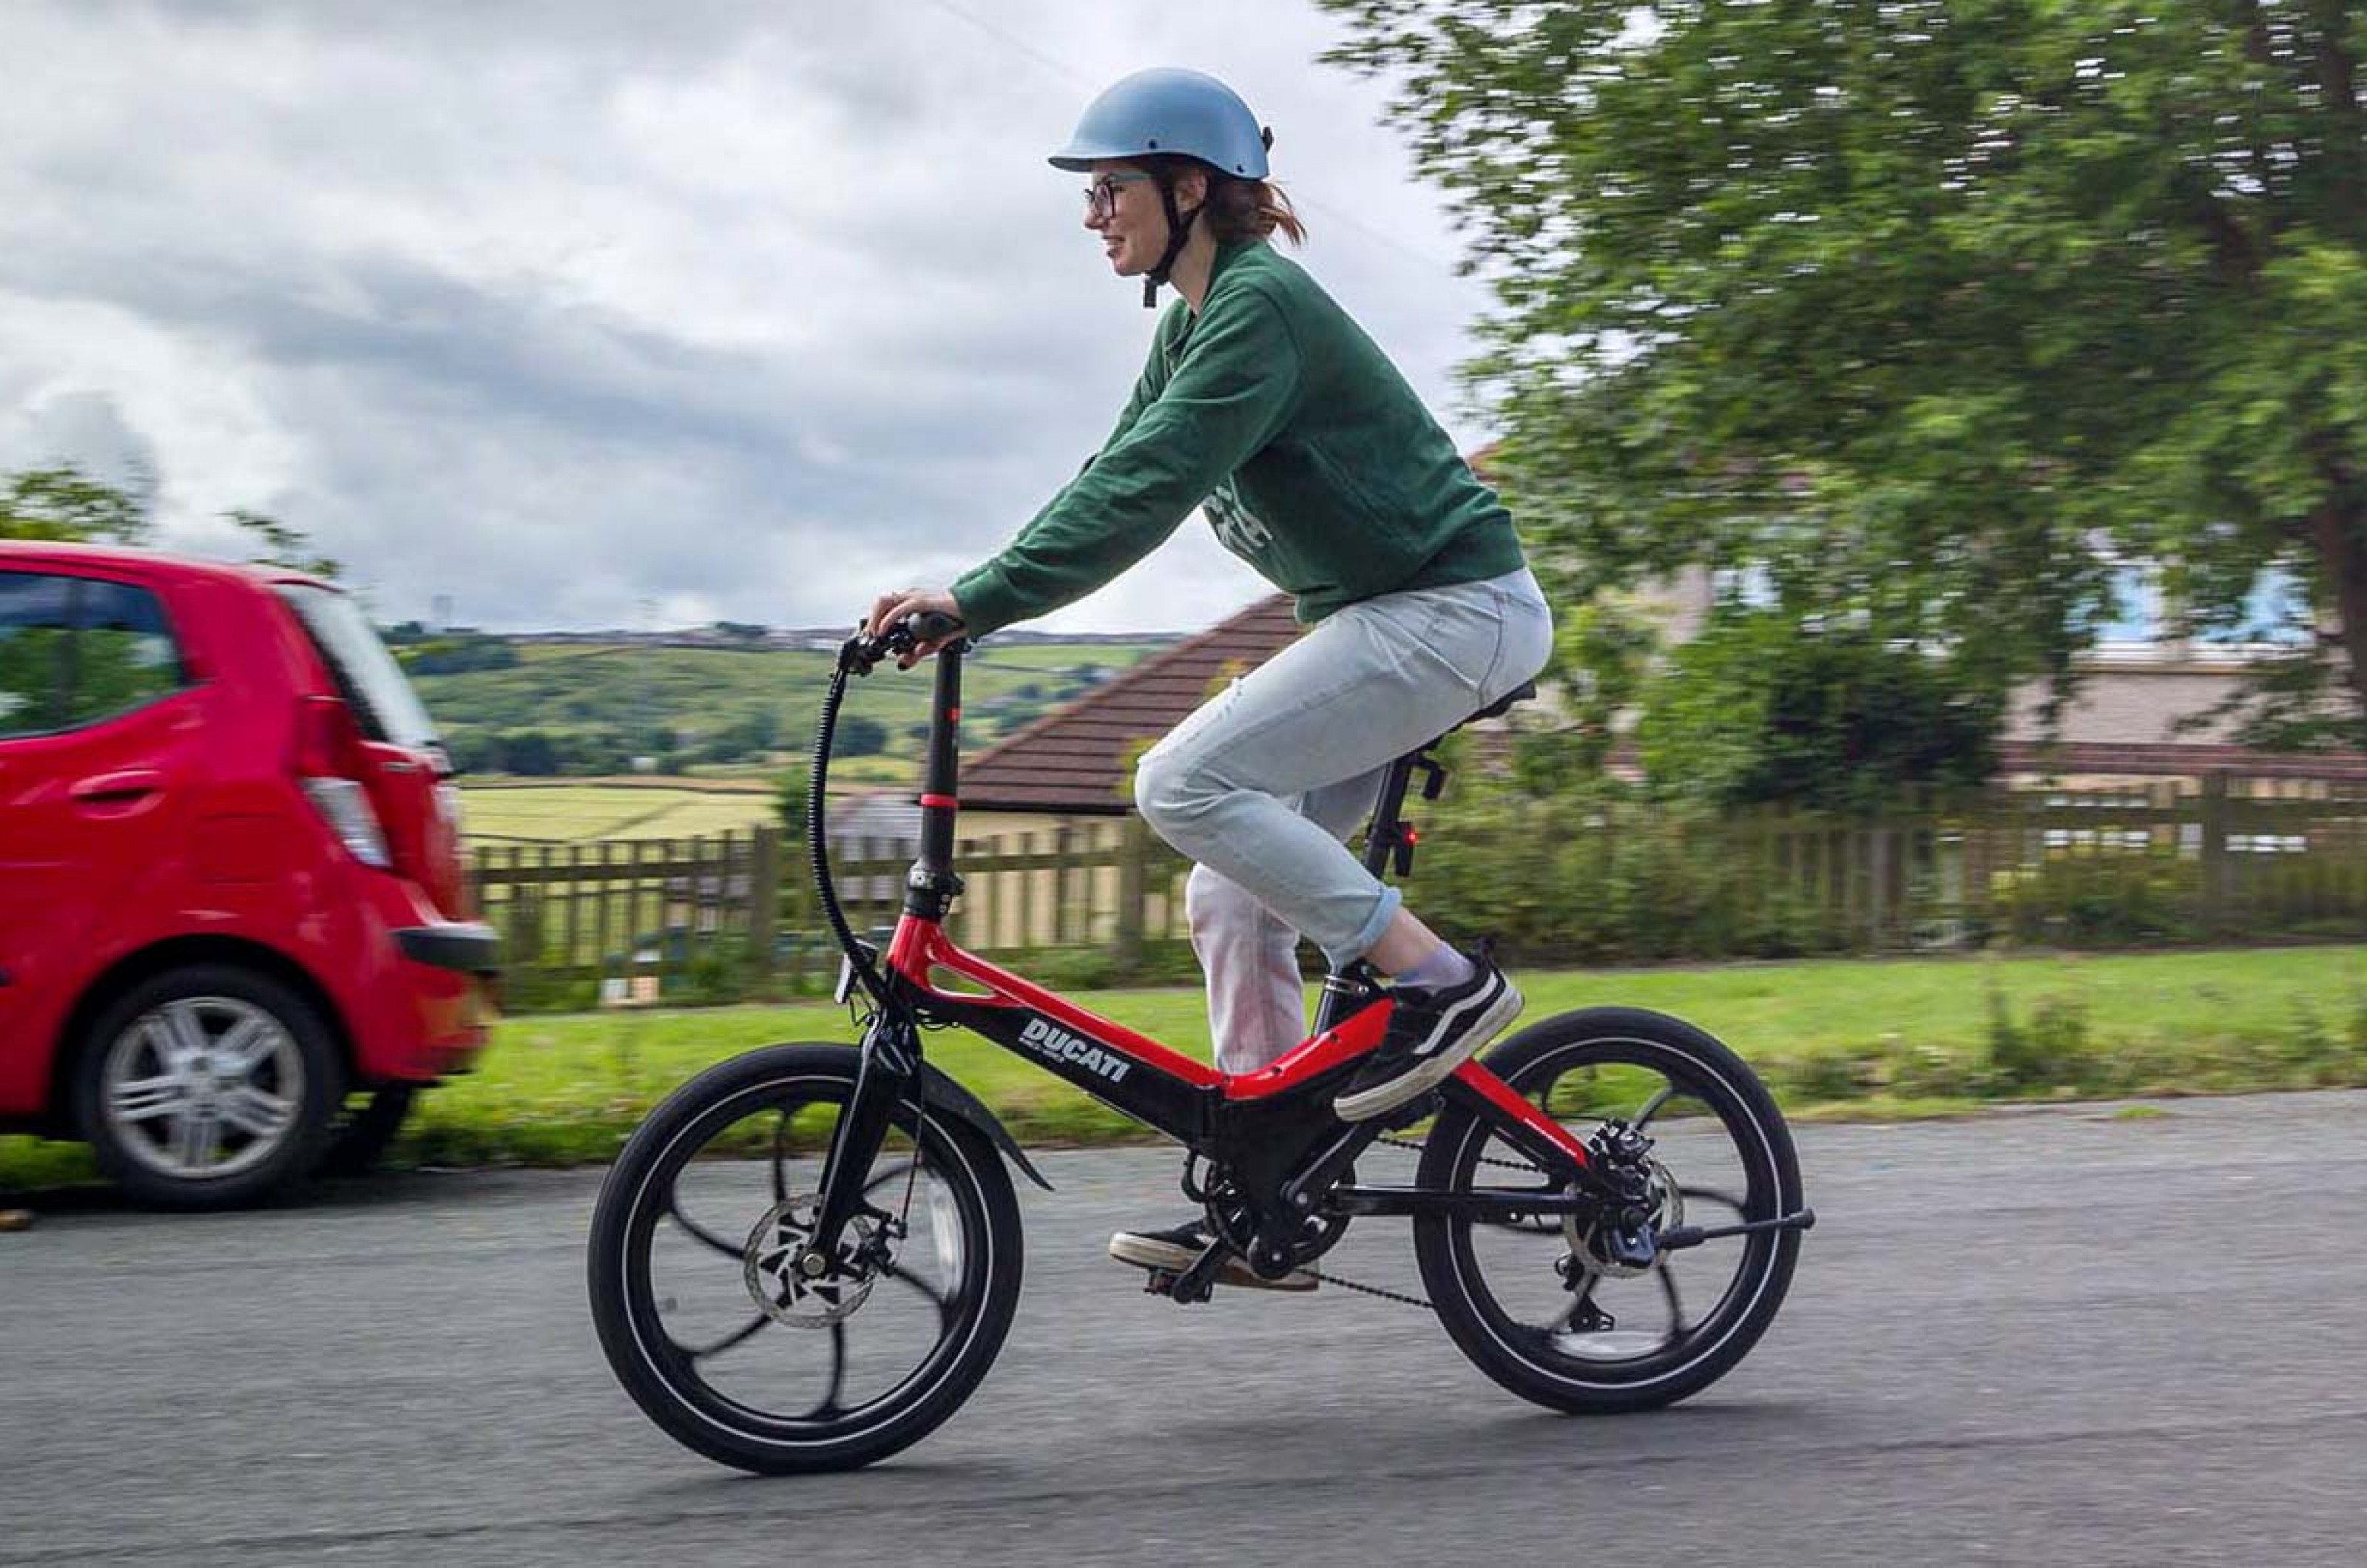 <p>But with so many styles and sizes of e-bike to choose from, selecting the right model for you isn’t always that straightforward, especially if you’re a newcomer. </p>  <p>With this in mind, we’ve put together a list of the best electric bikes from several categories to help you decide which one will best suit your needs. </p>